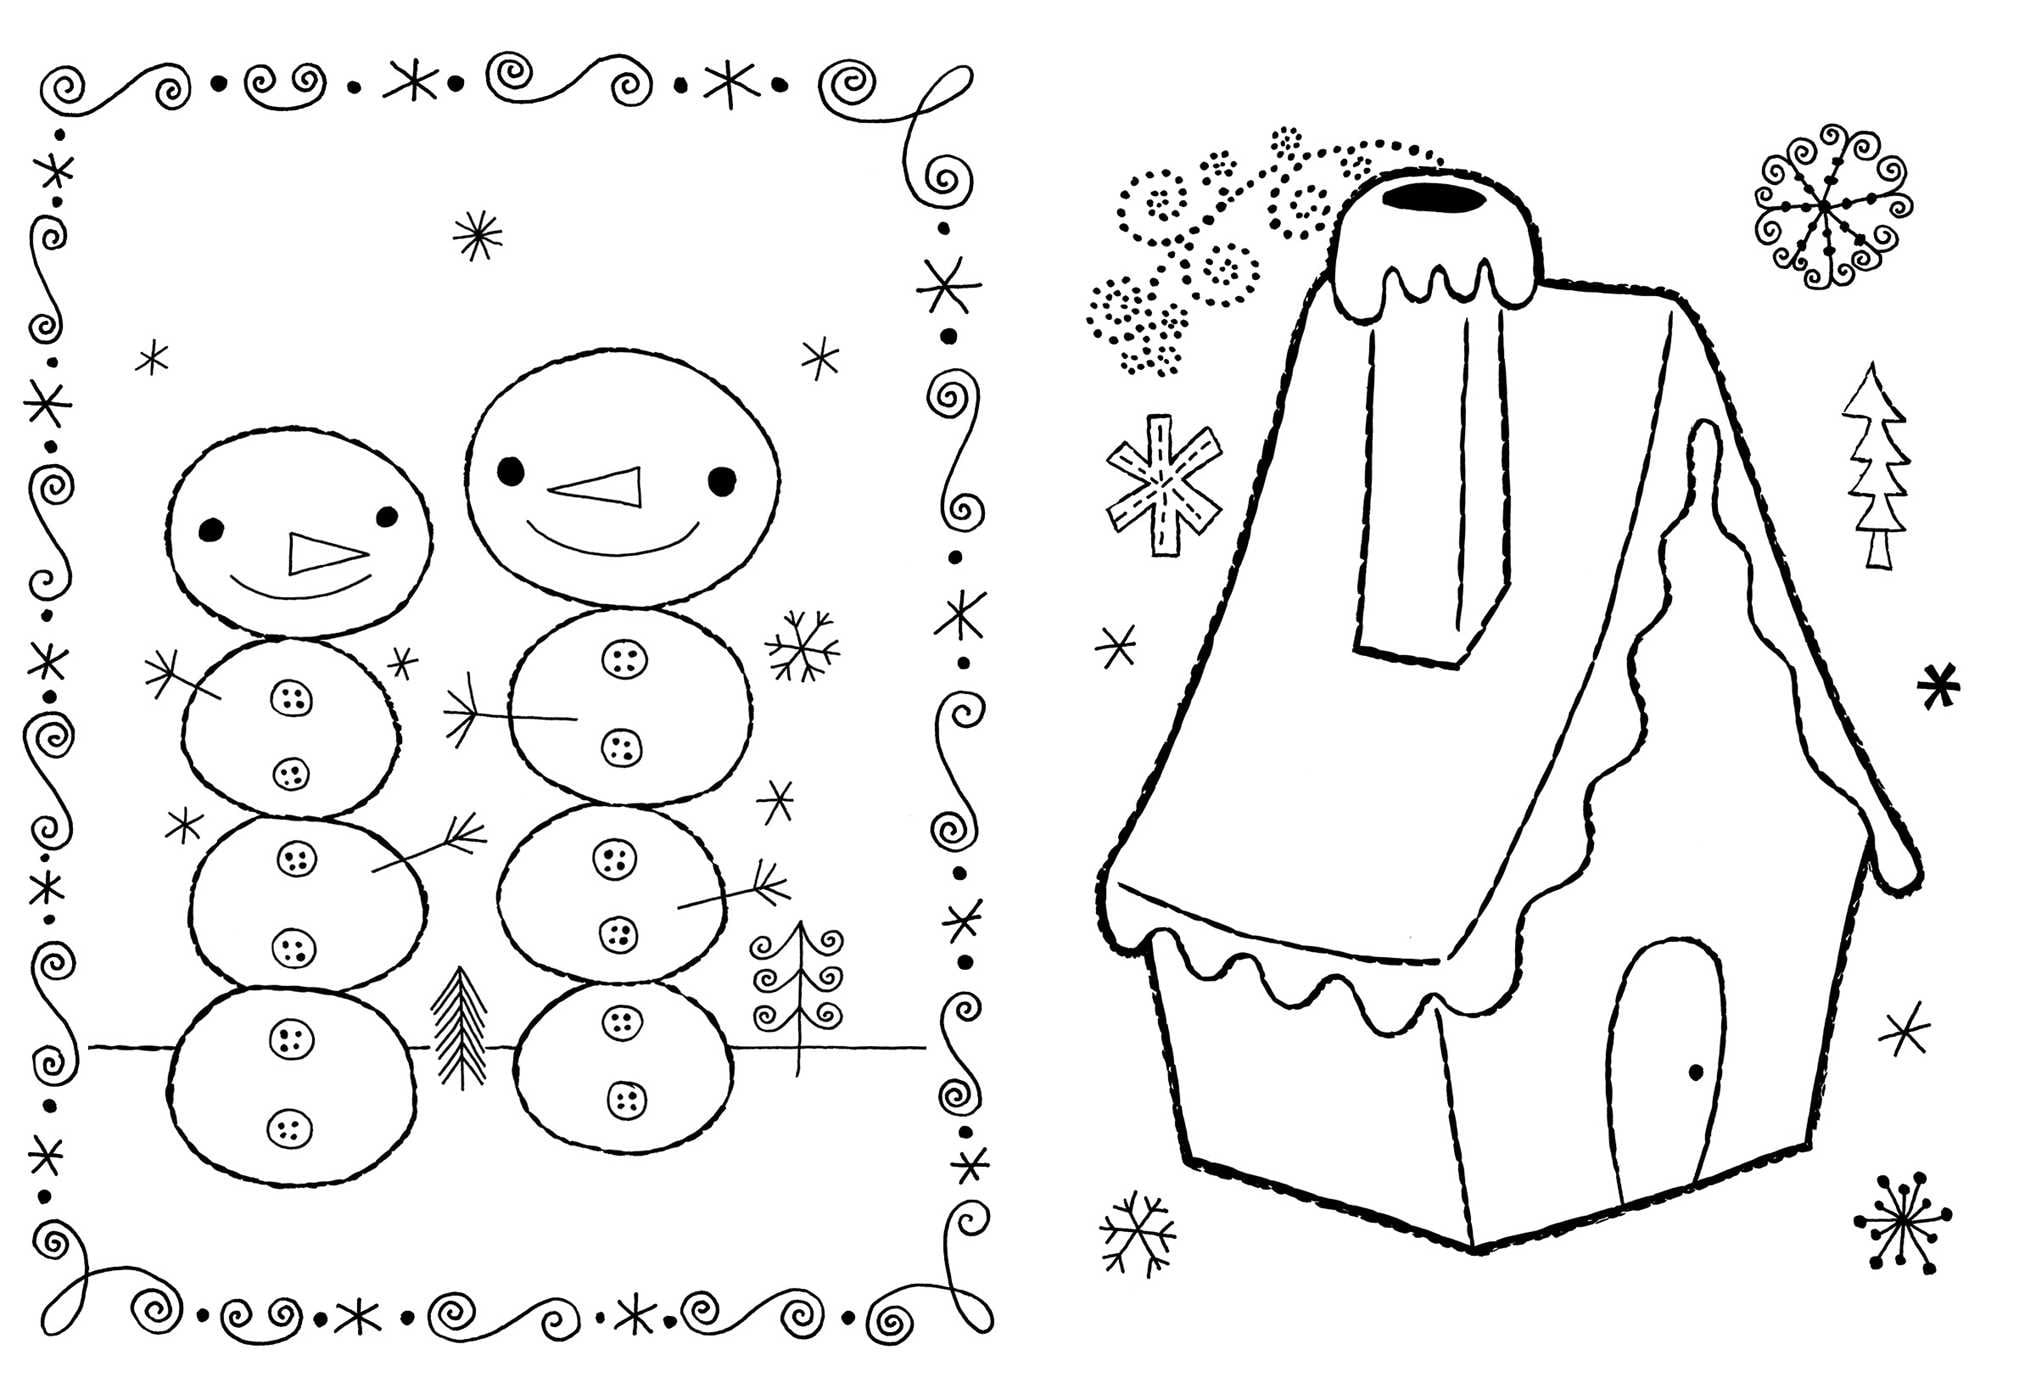 Dream Doodle Draw Gift Set Animals Patterns Snow Part Of Dream